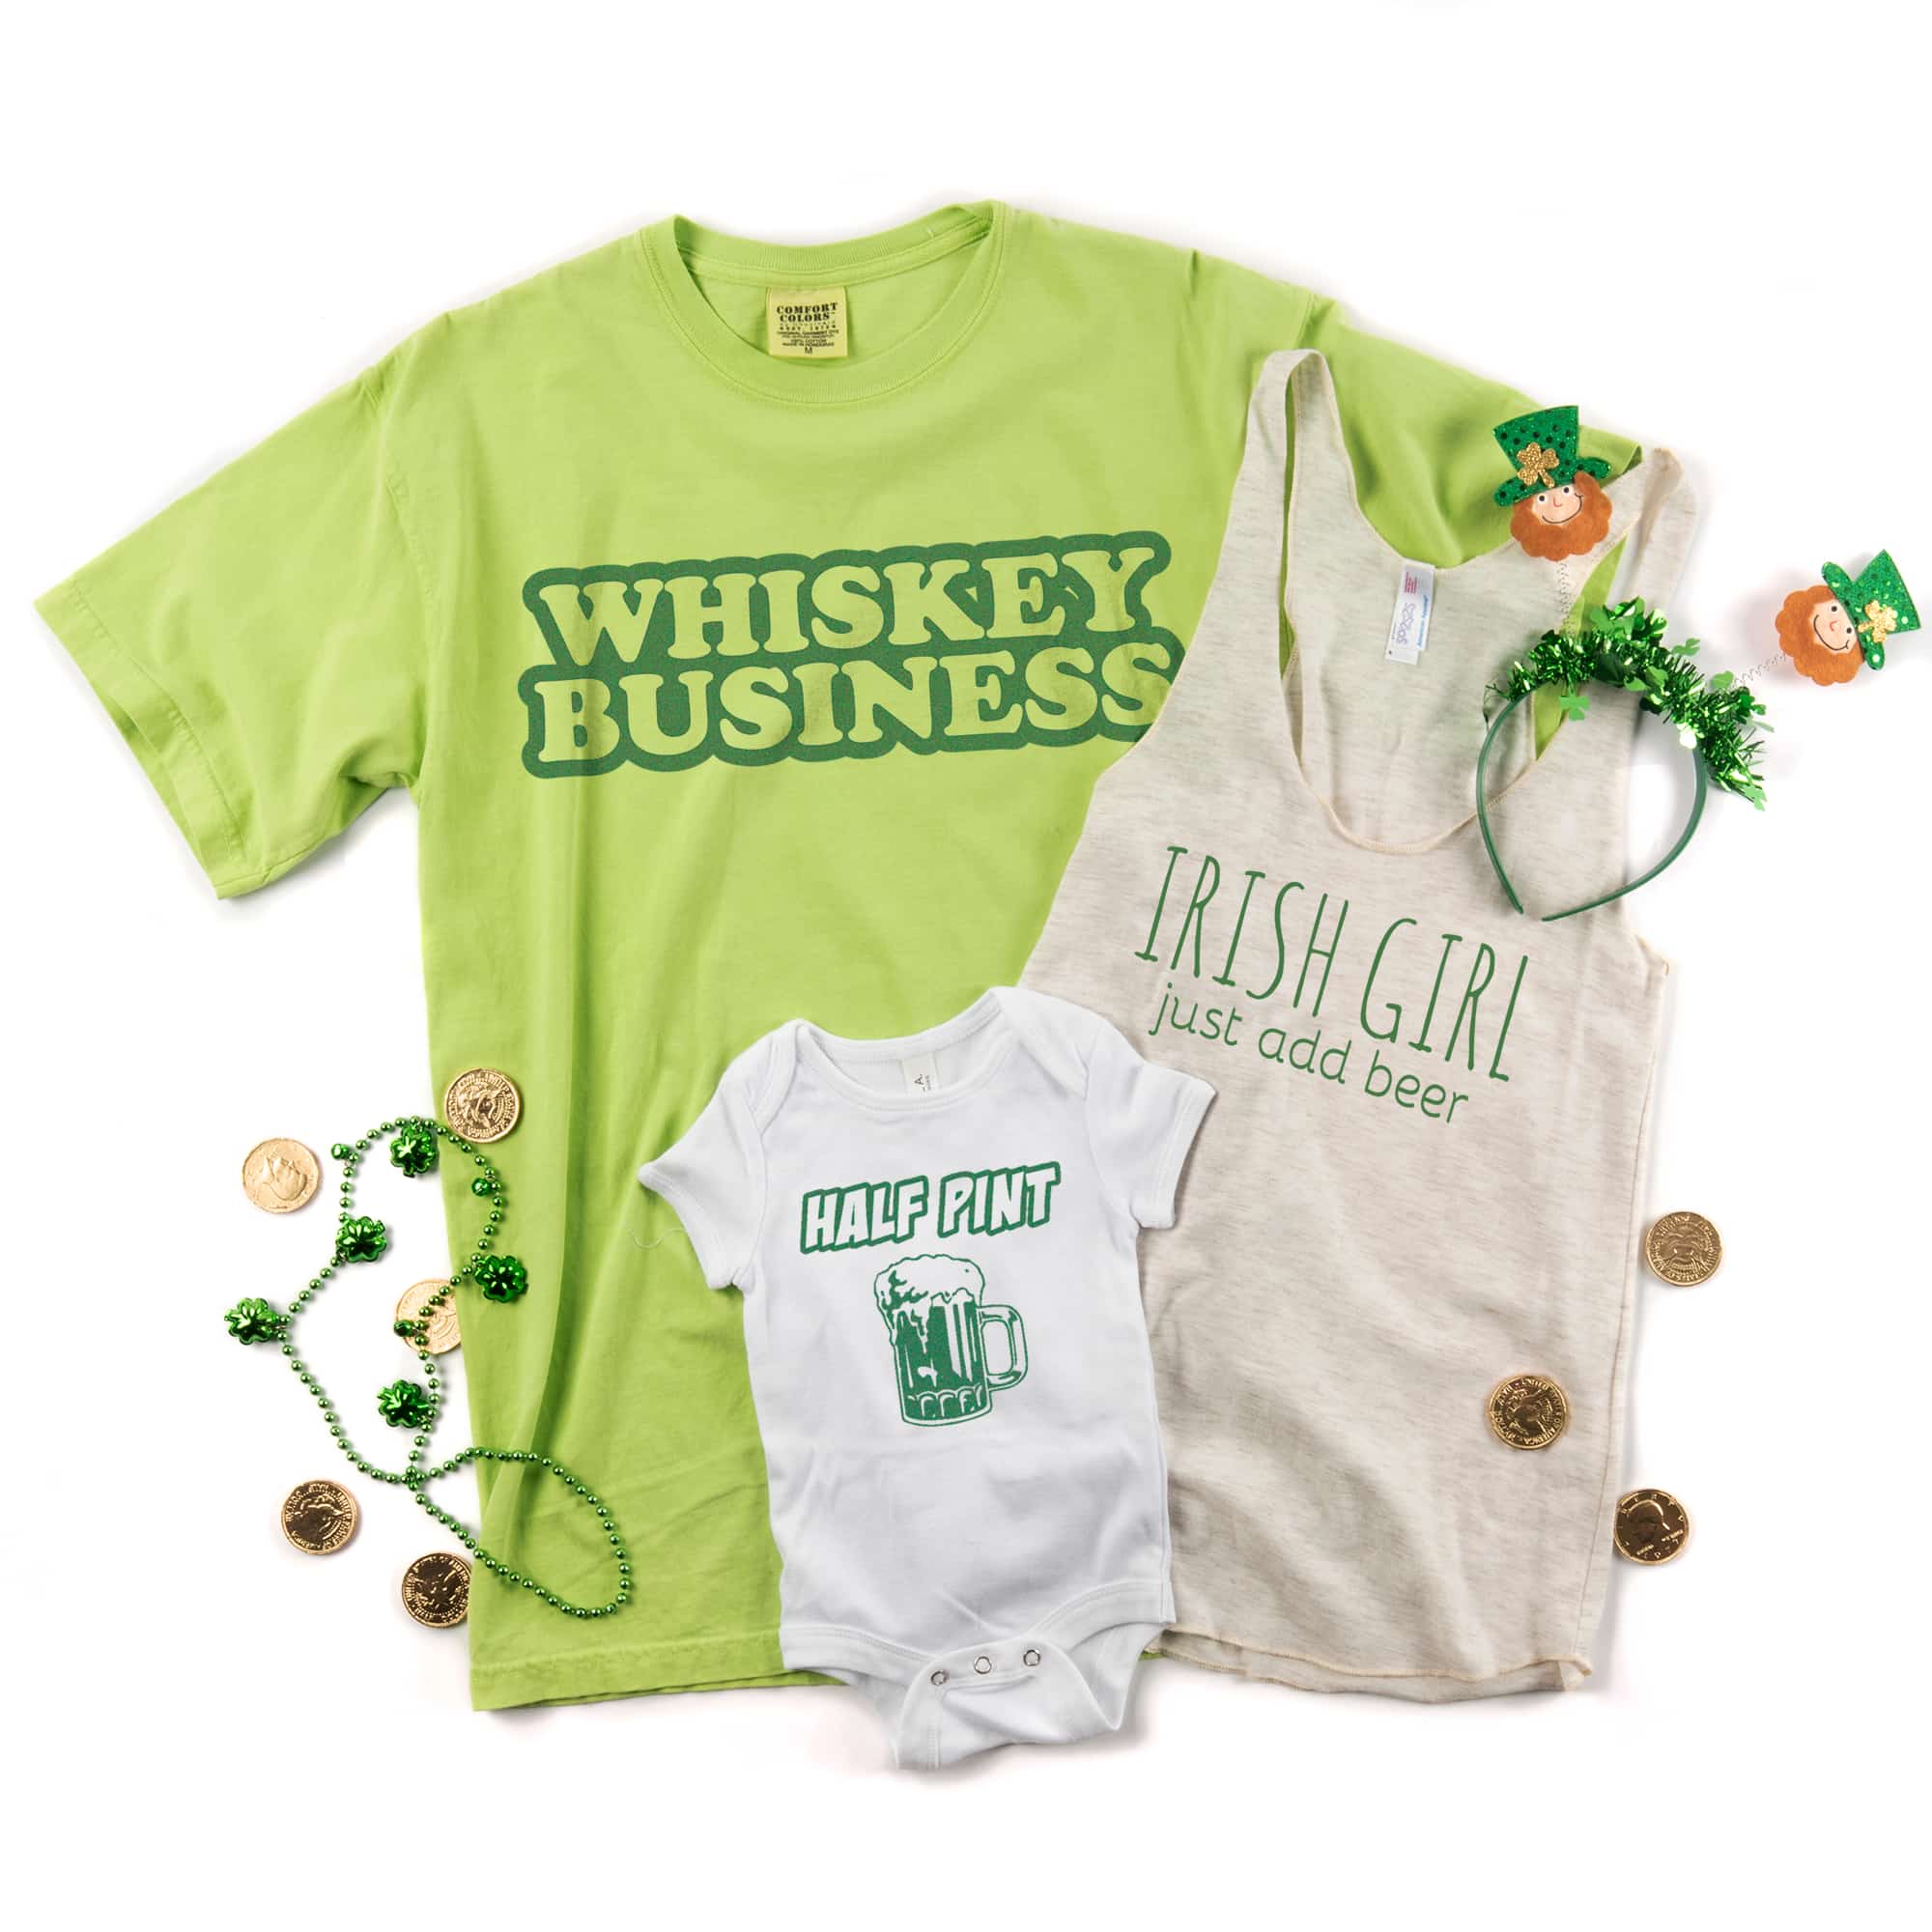 A family of St. Patrick's Day t-shirt designs.